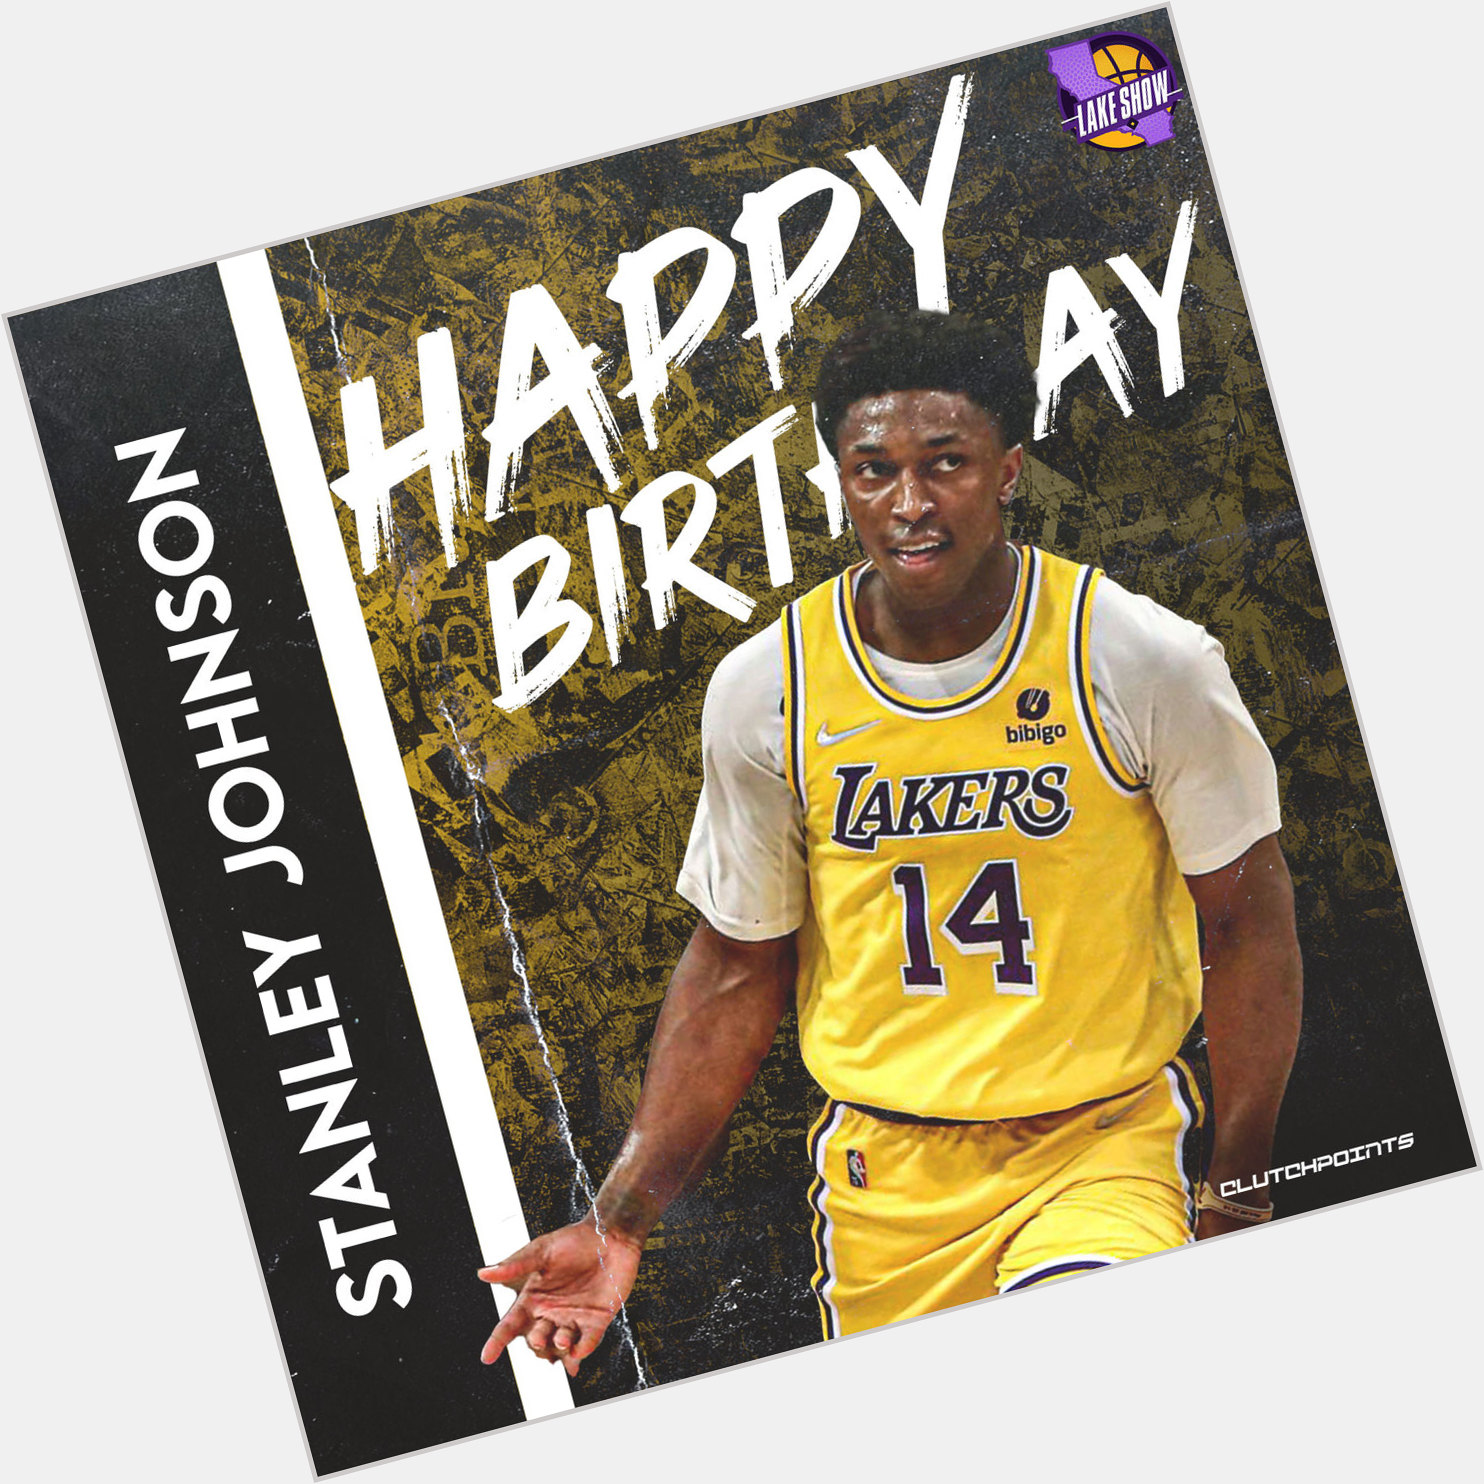 Lakers Nation! Let us all greet Stanley Johnson a happy birthday! 